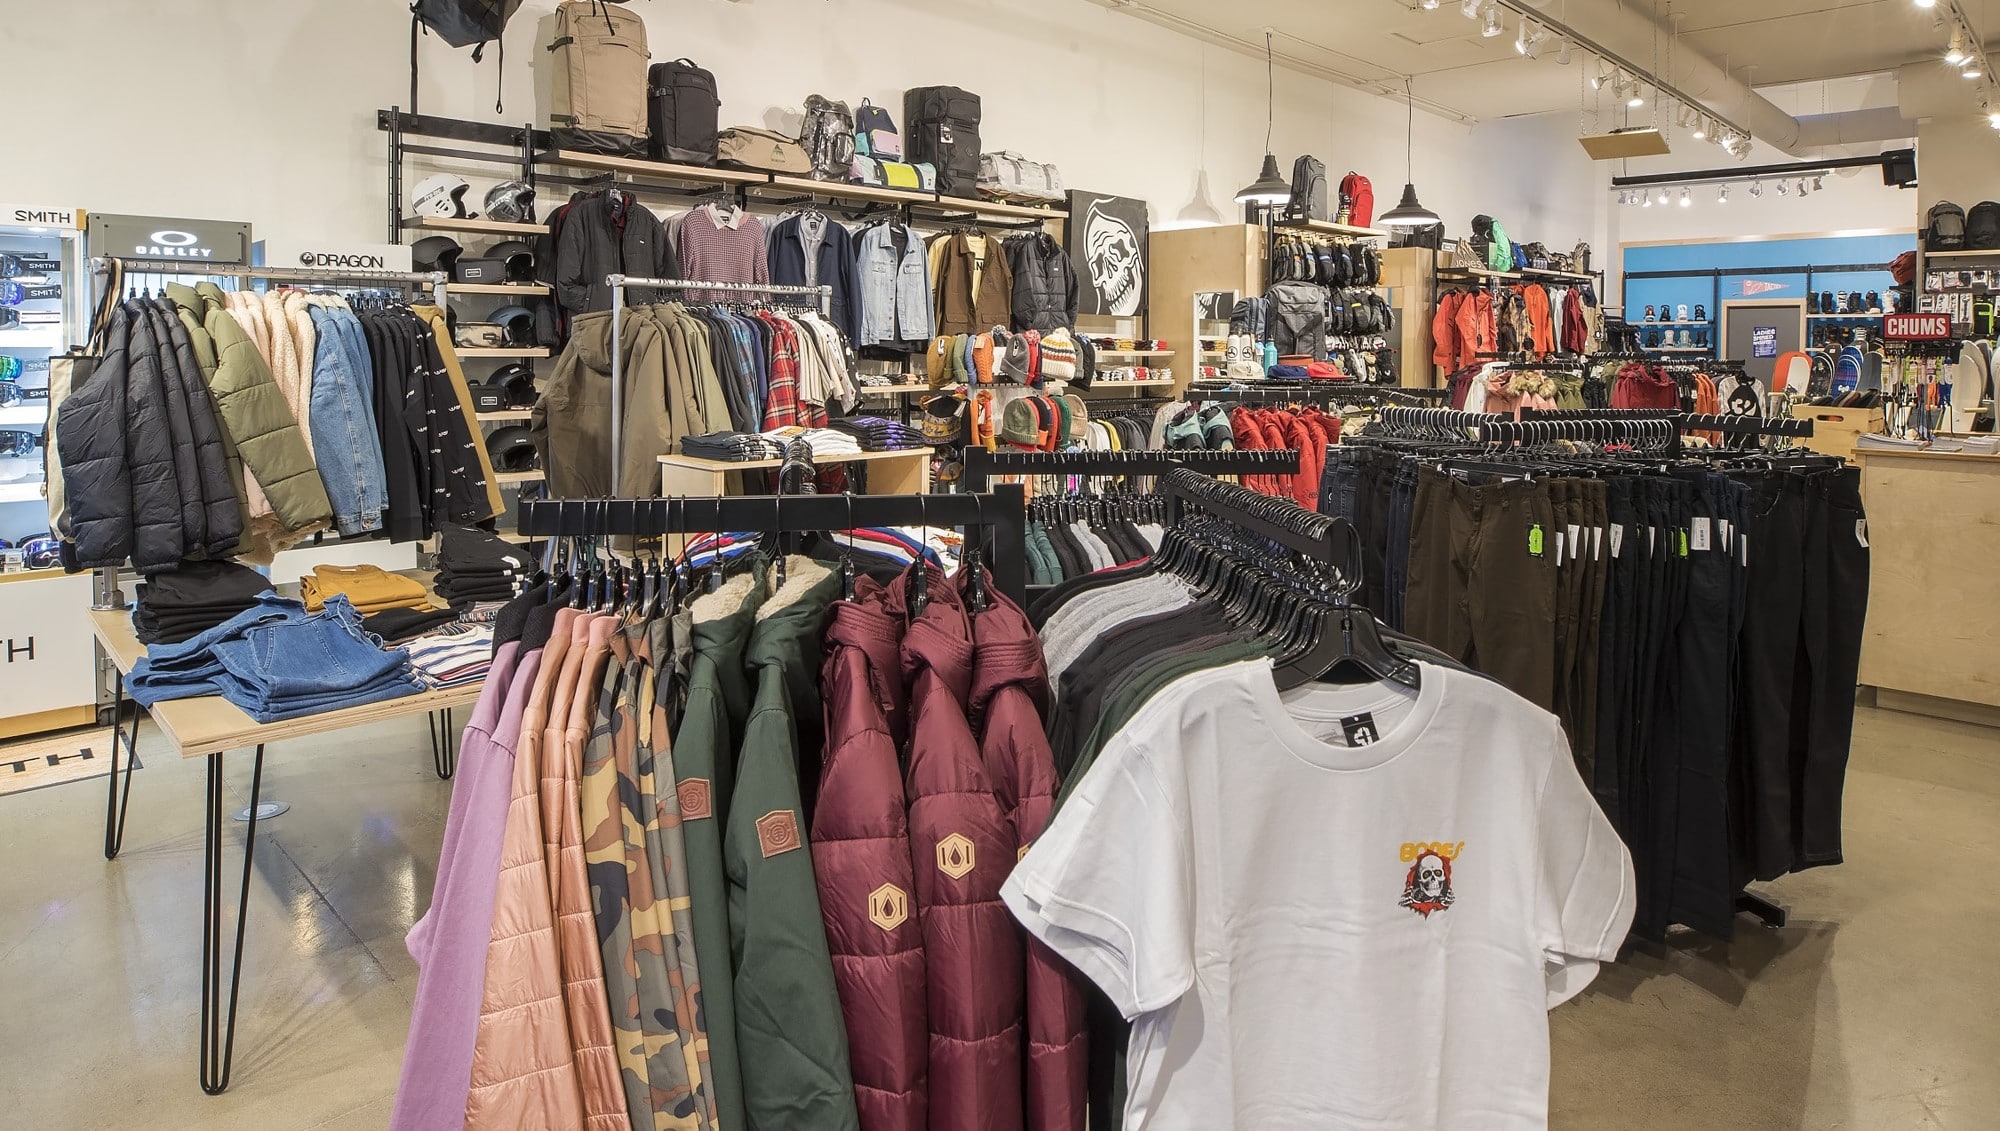 Clothing Stores for Skate shoes, Skateboards, Snowboards, & Streetwear